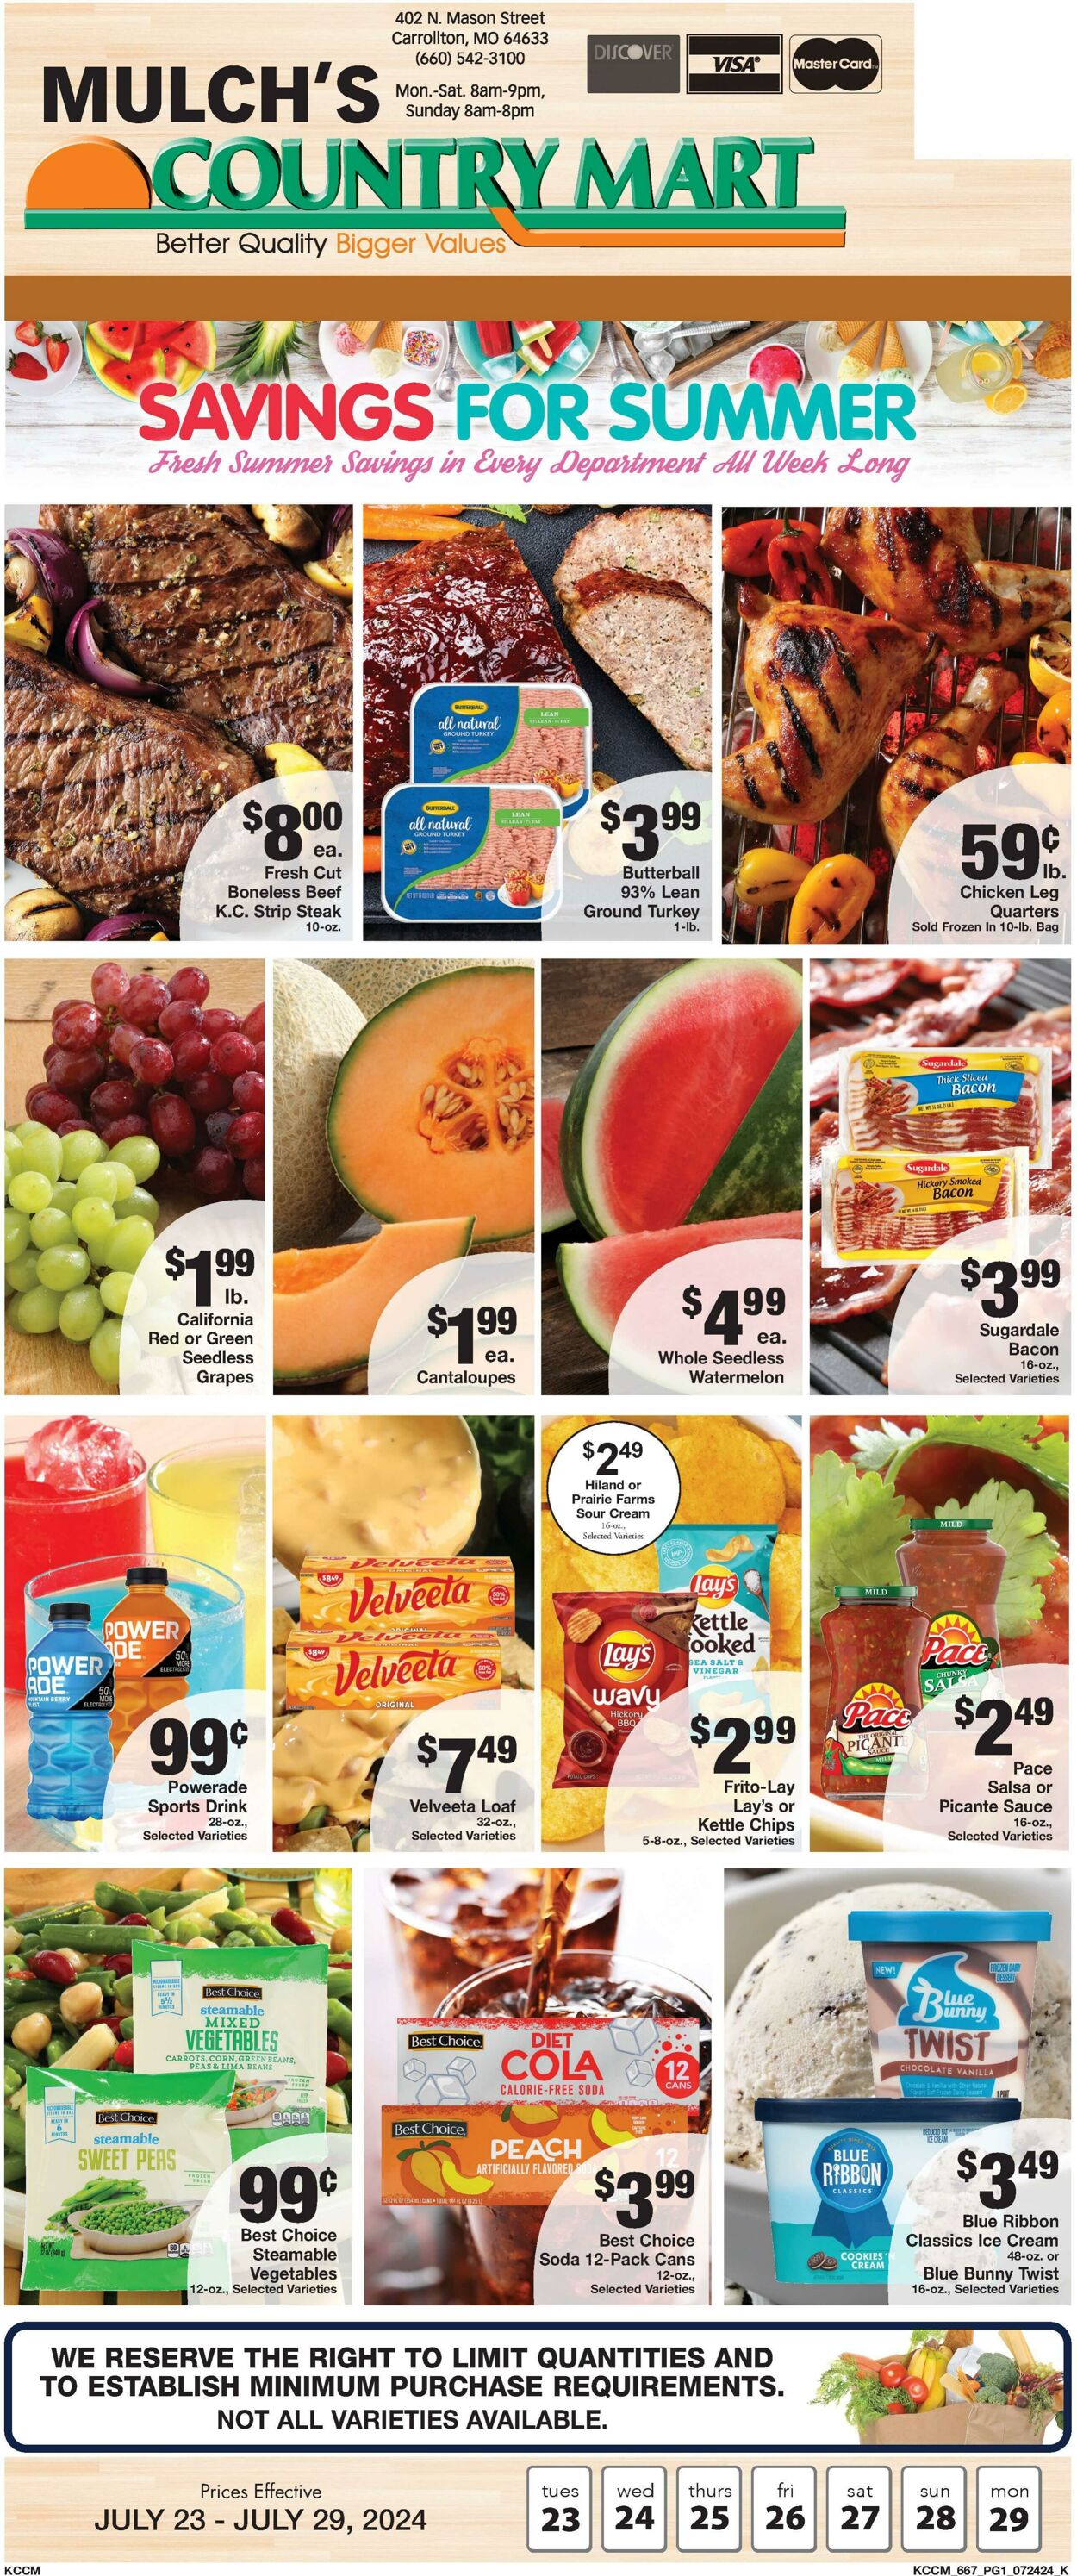 Country Mart Promotional weekly ads